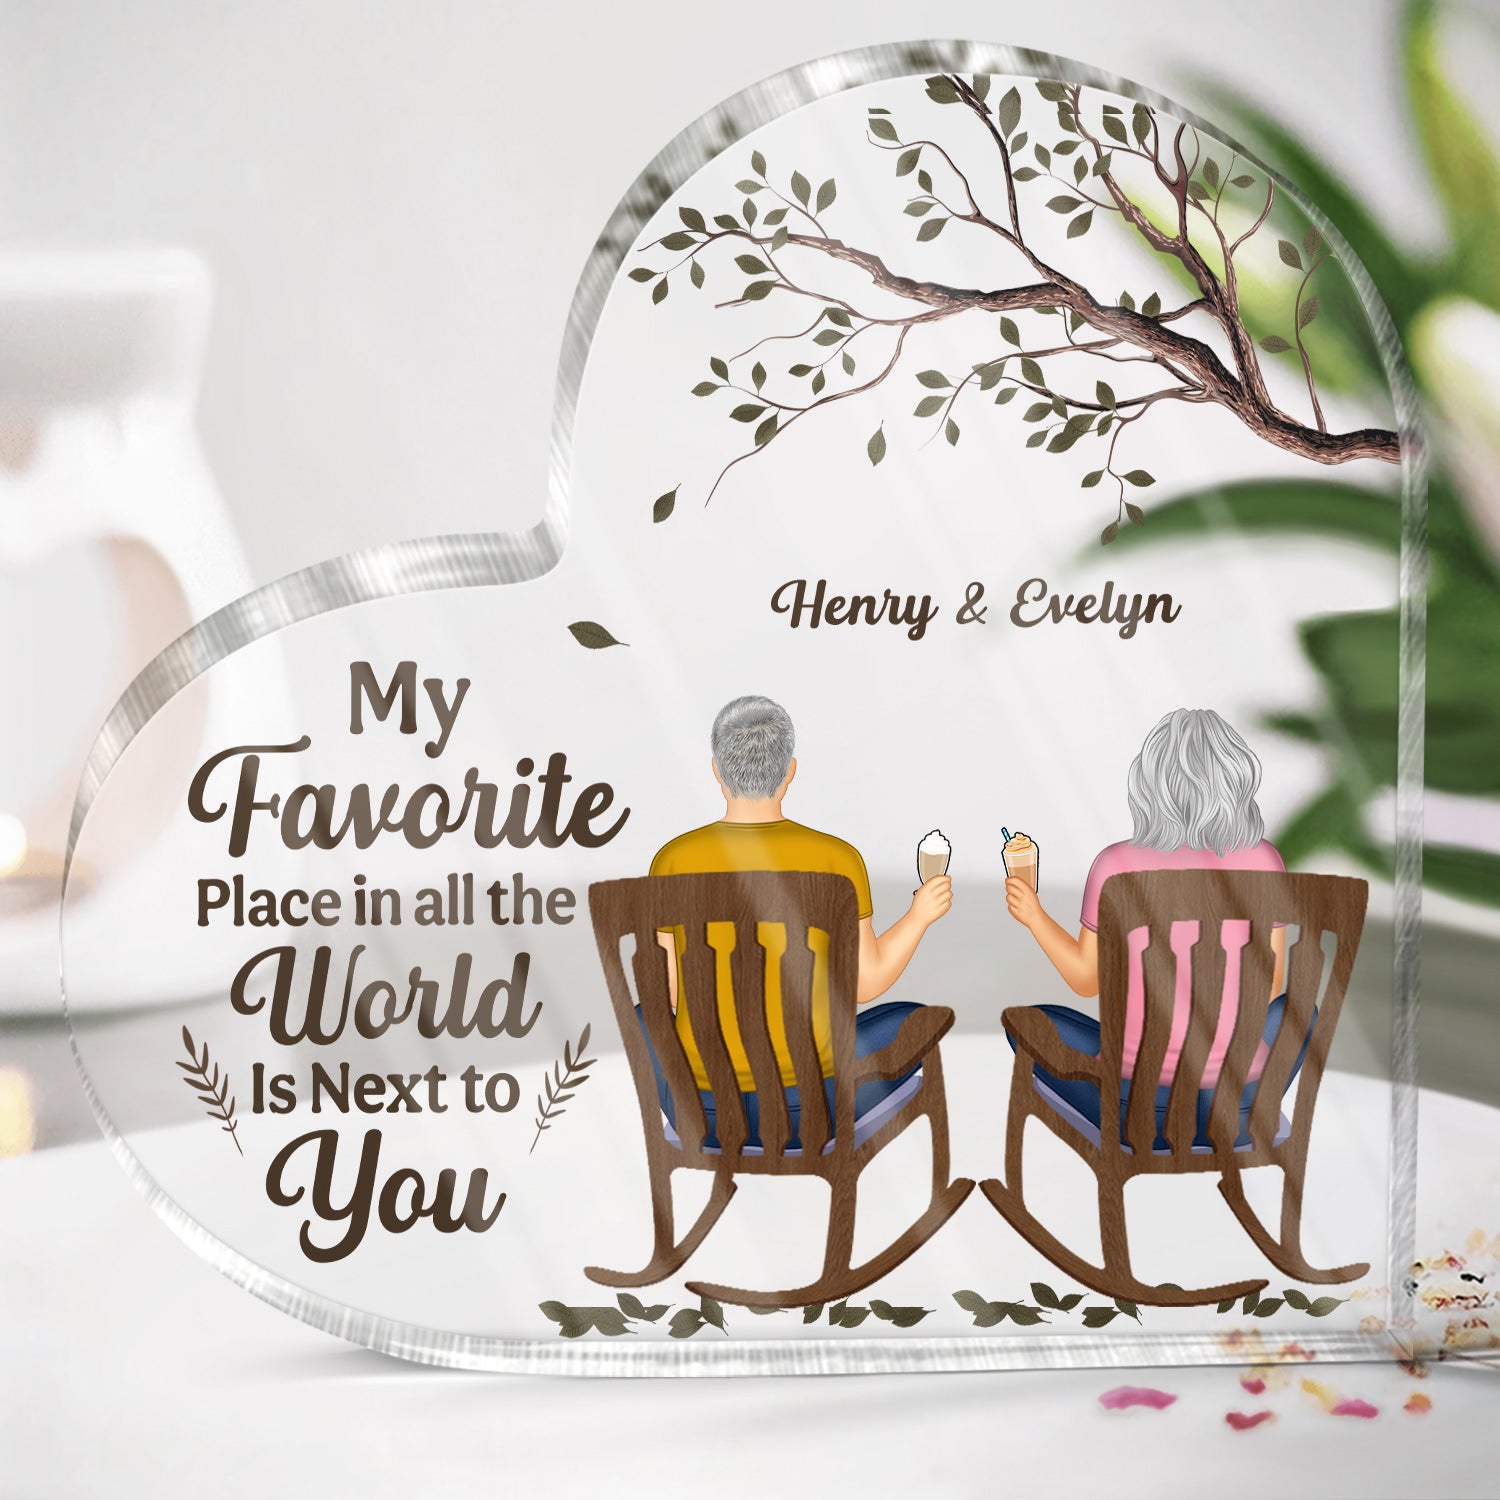 Next To You - Anniversary Gift For Couples - Personalized Heart Shaped Acrylic Plaque